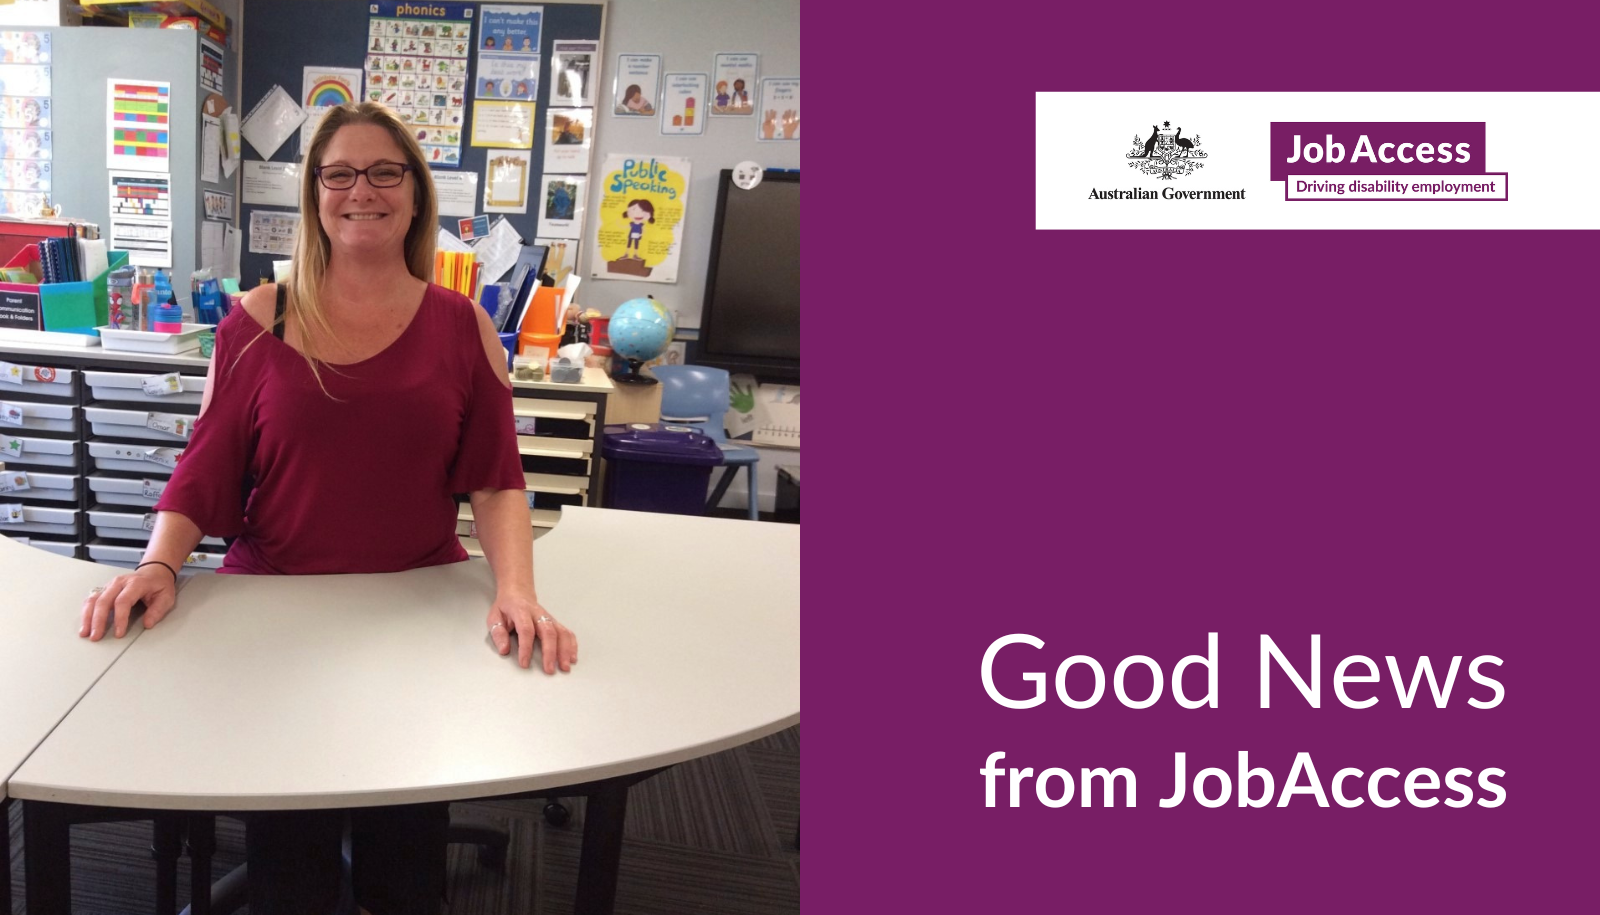 Tara Robinson is standing in the classroom and smiling at the camera. On the right, the text at the bottom reads ‘Good News from JobAccess’, and the JobAccess logo is on the top.